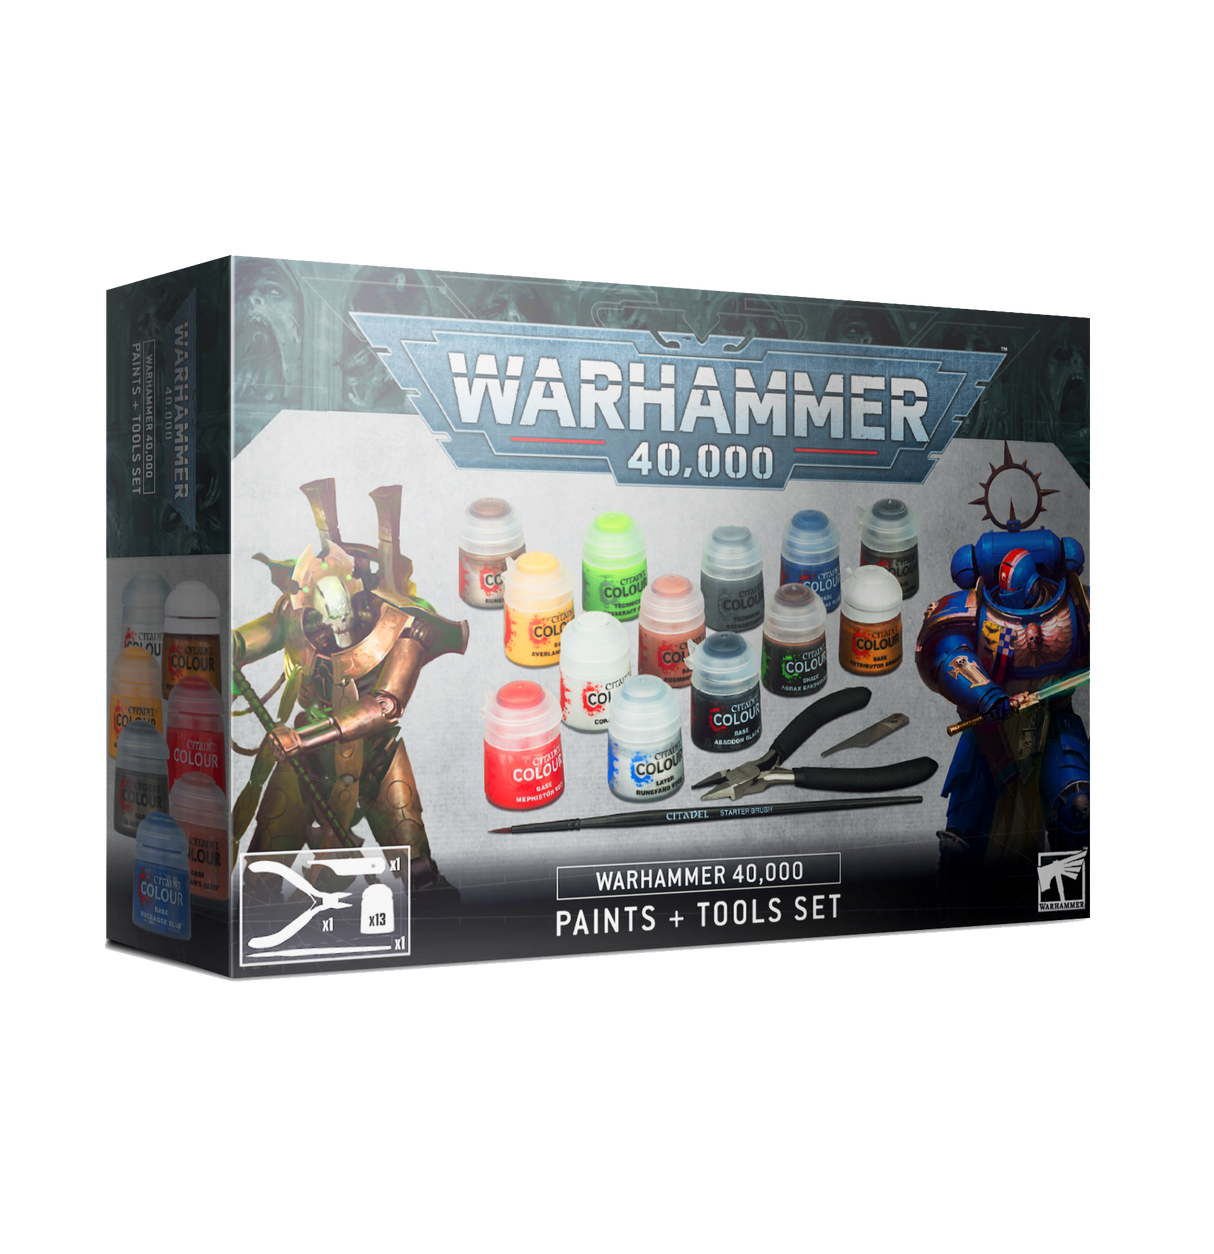 Warhammer 40,000: Paints and Tools Set